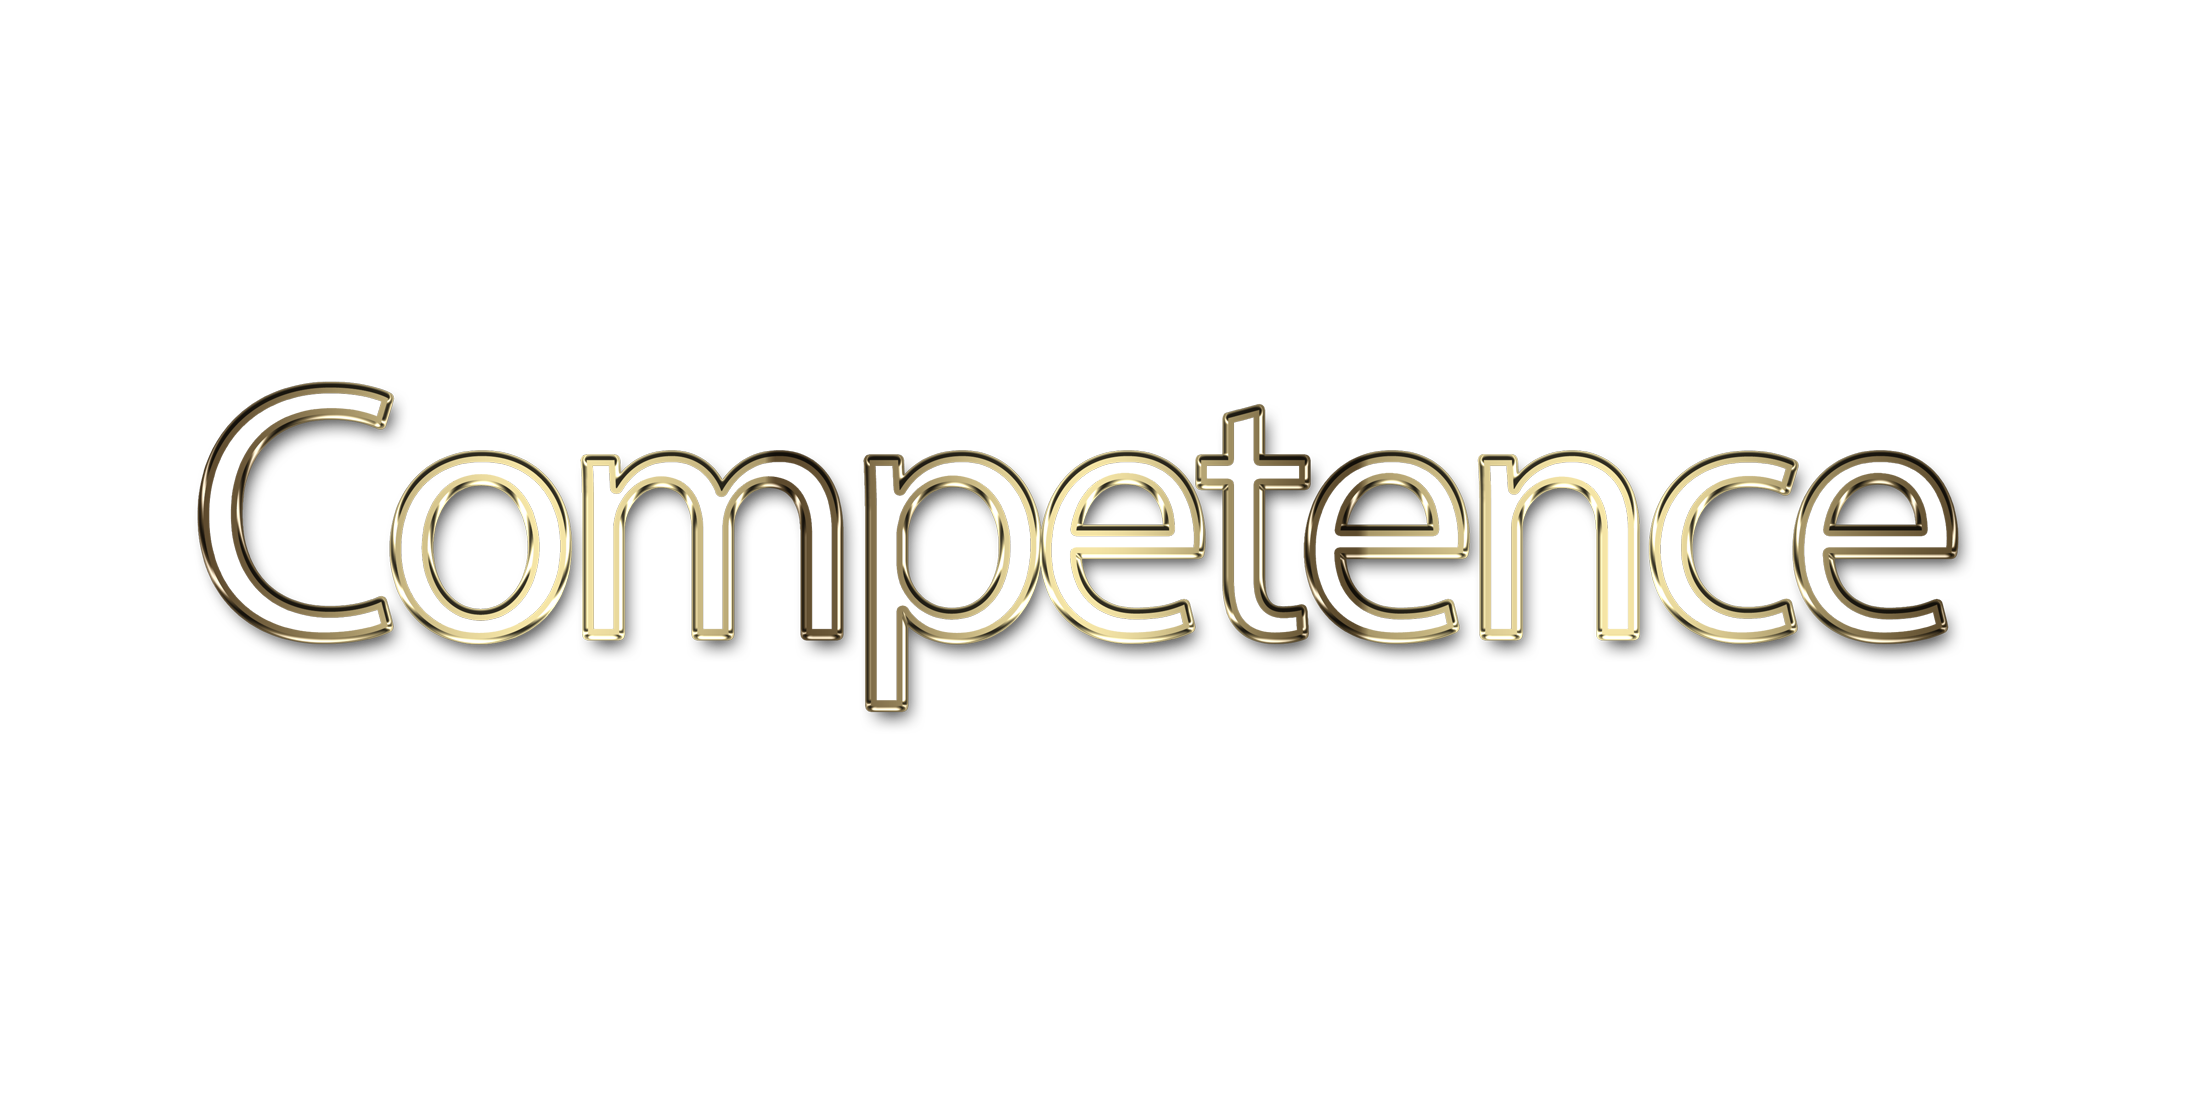 Competence png, word Competence png, Competence word png, Competence text png, Competence letters png, Competence word art typography PNG images, transparent png